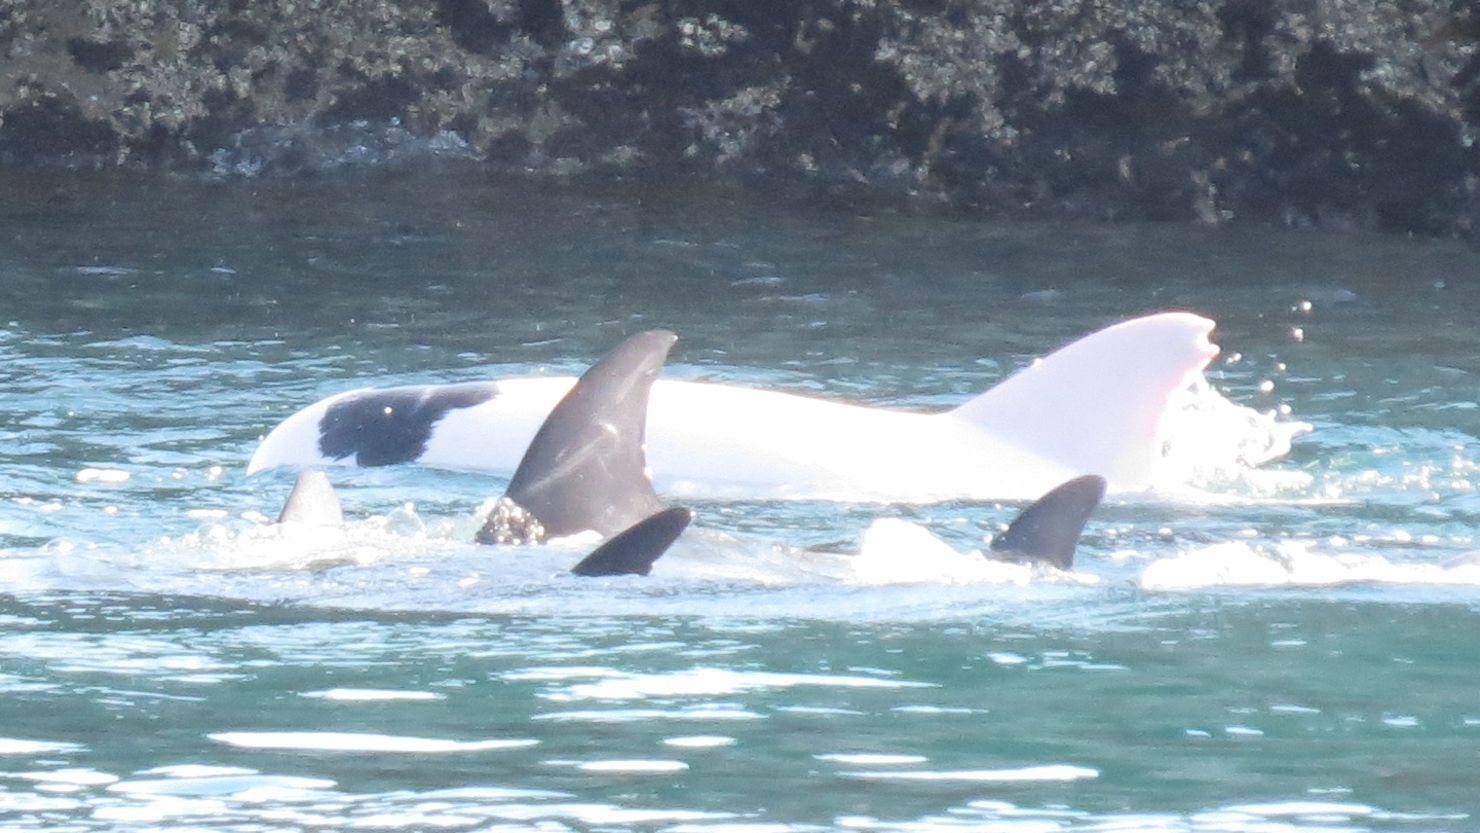 A rare albino dolphin is herded into a small cove by hunters before being captured.